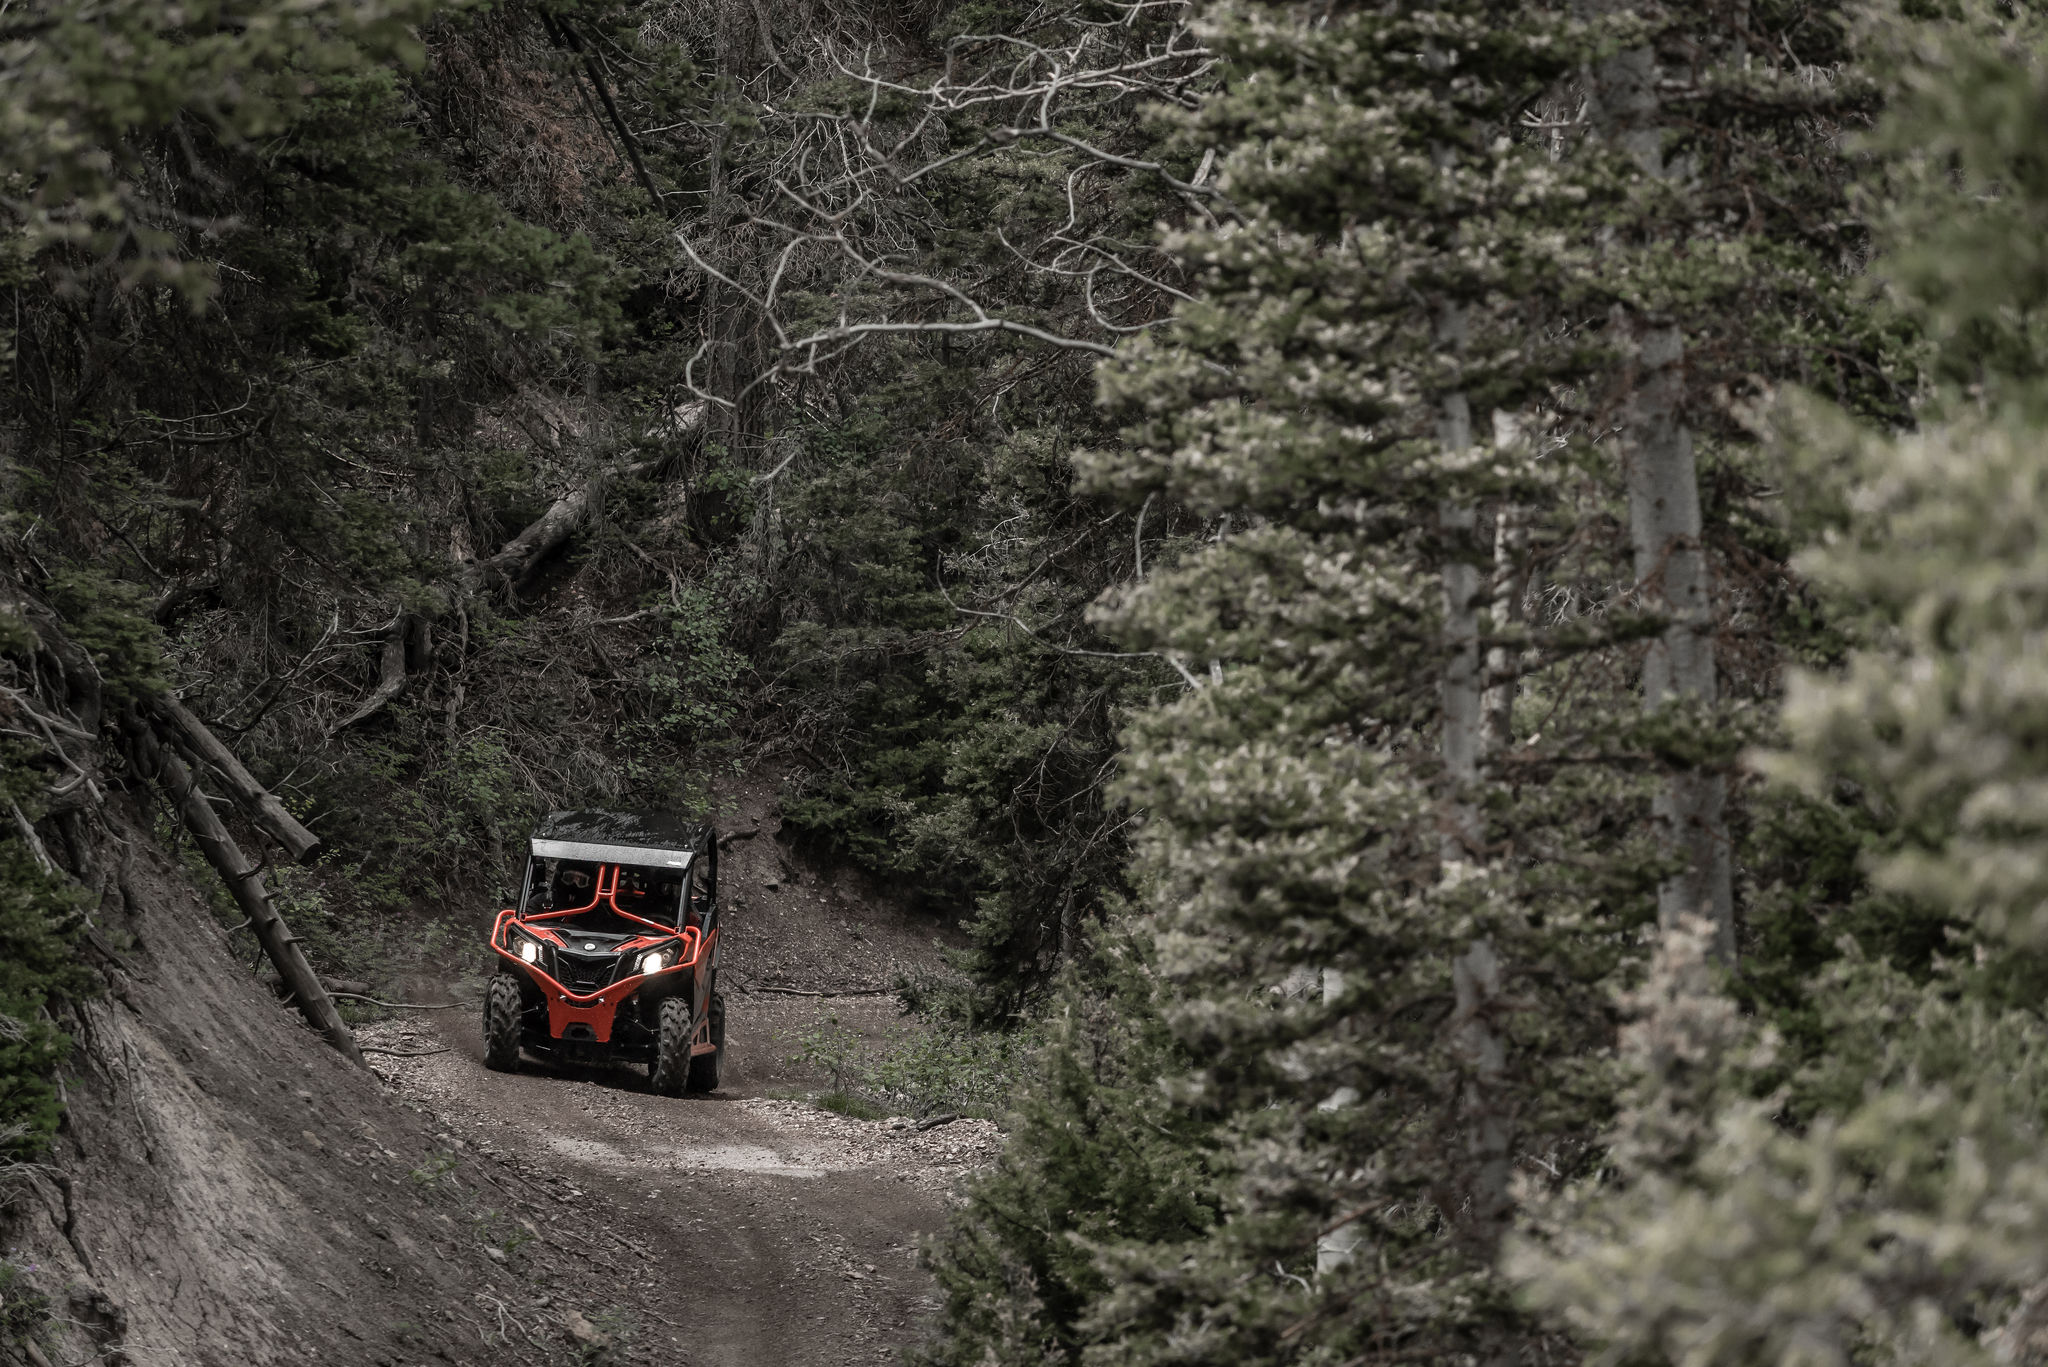 A Can-Am driving on a trail through the forest